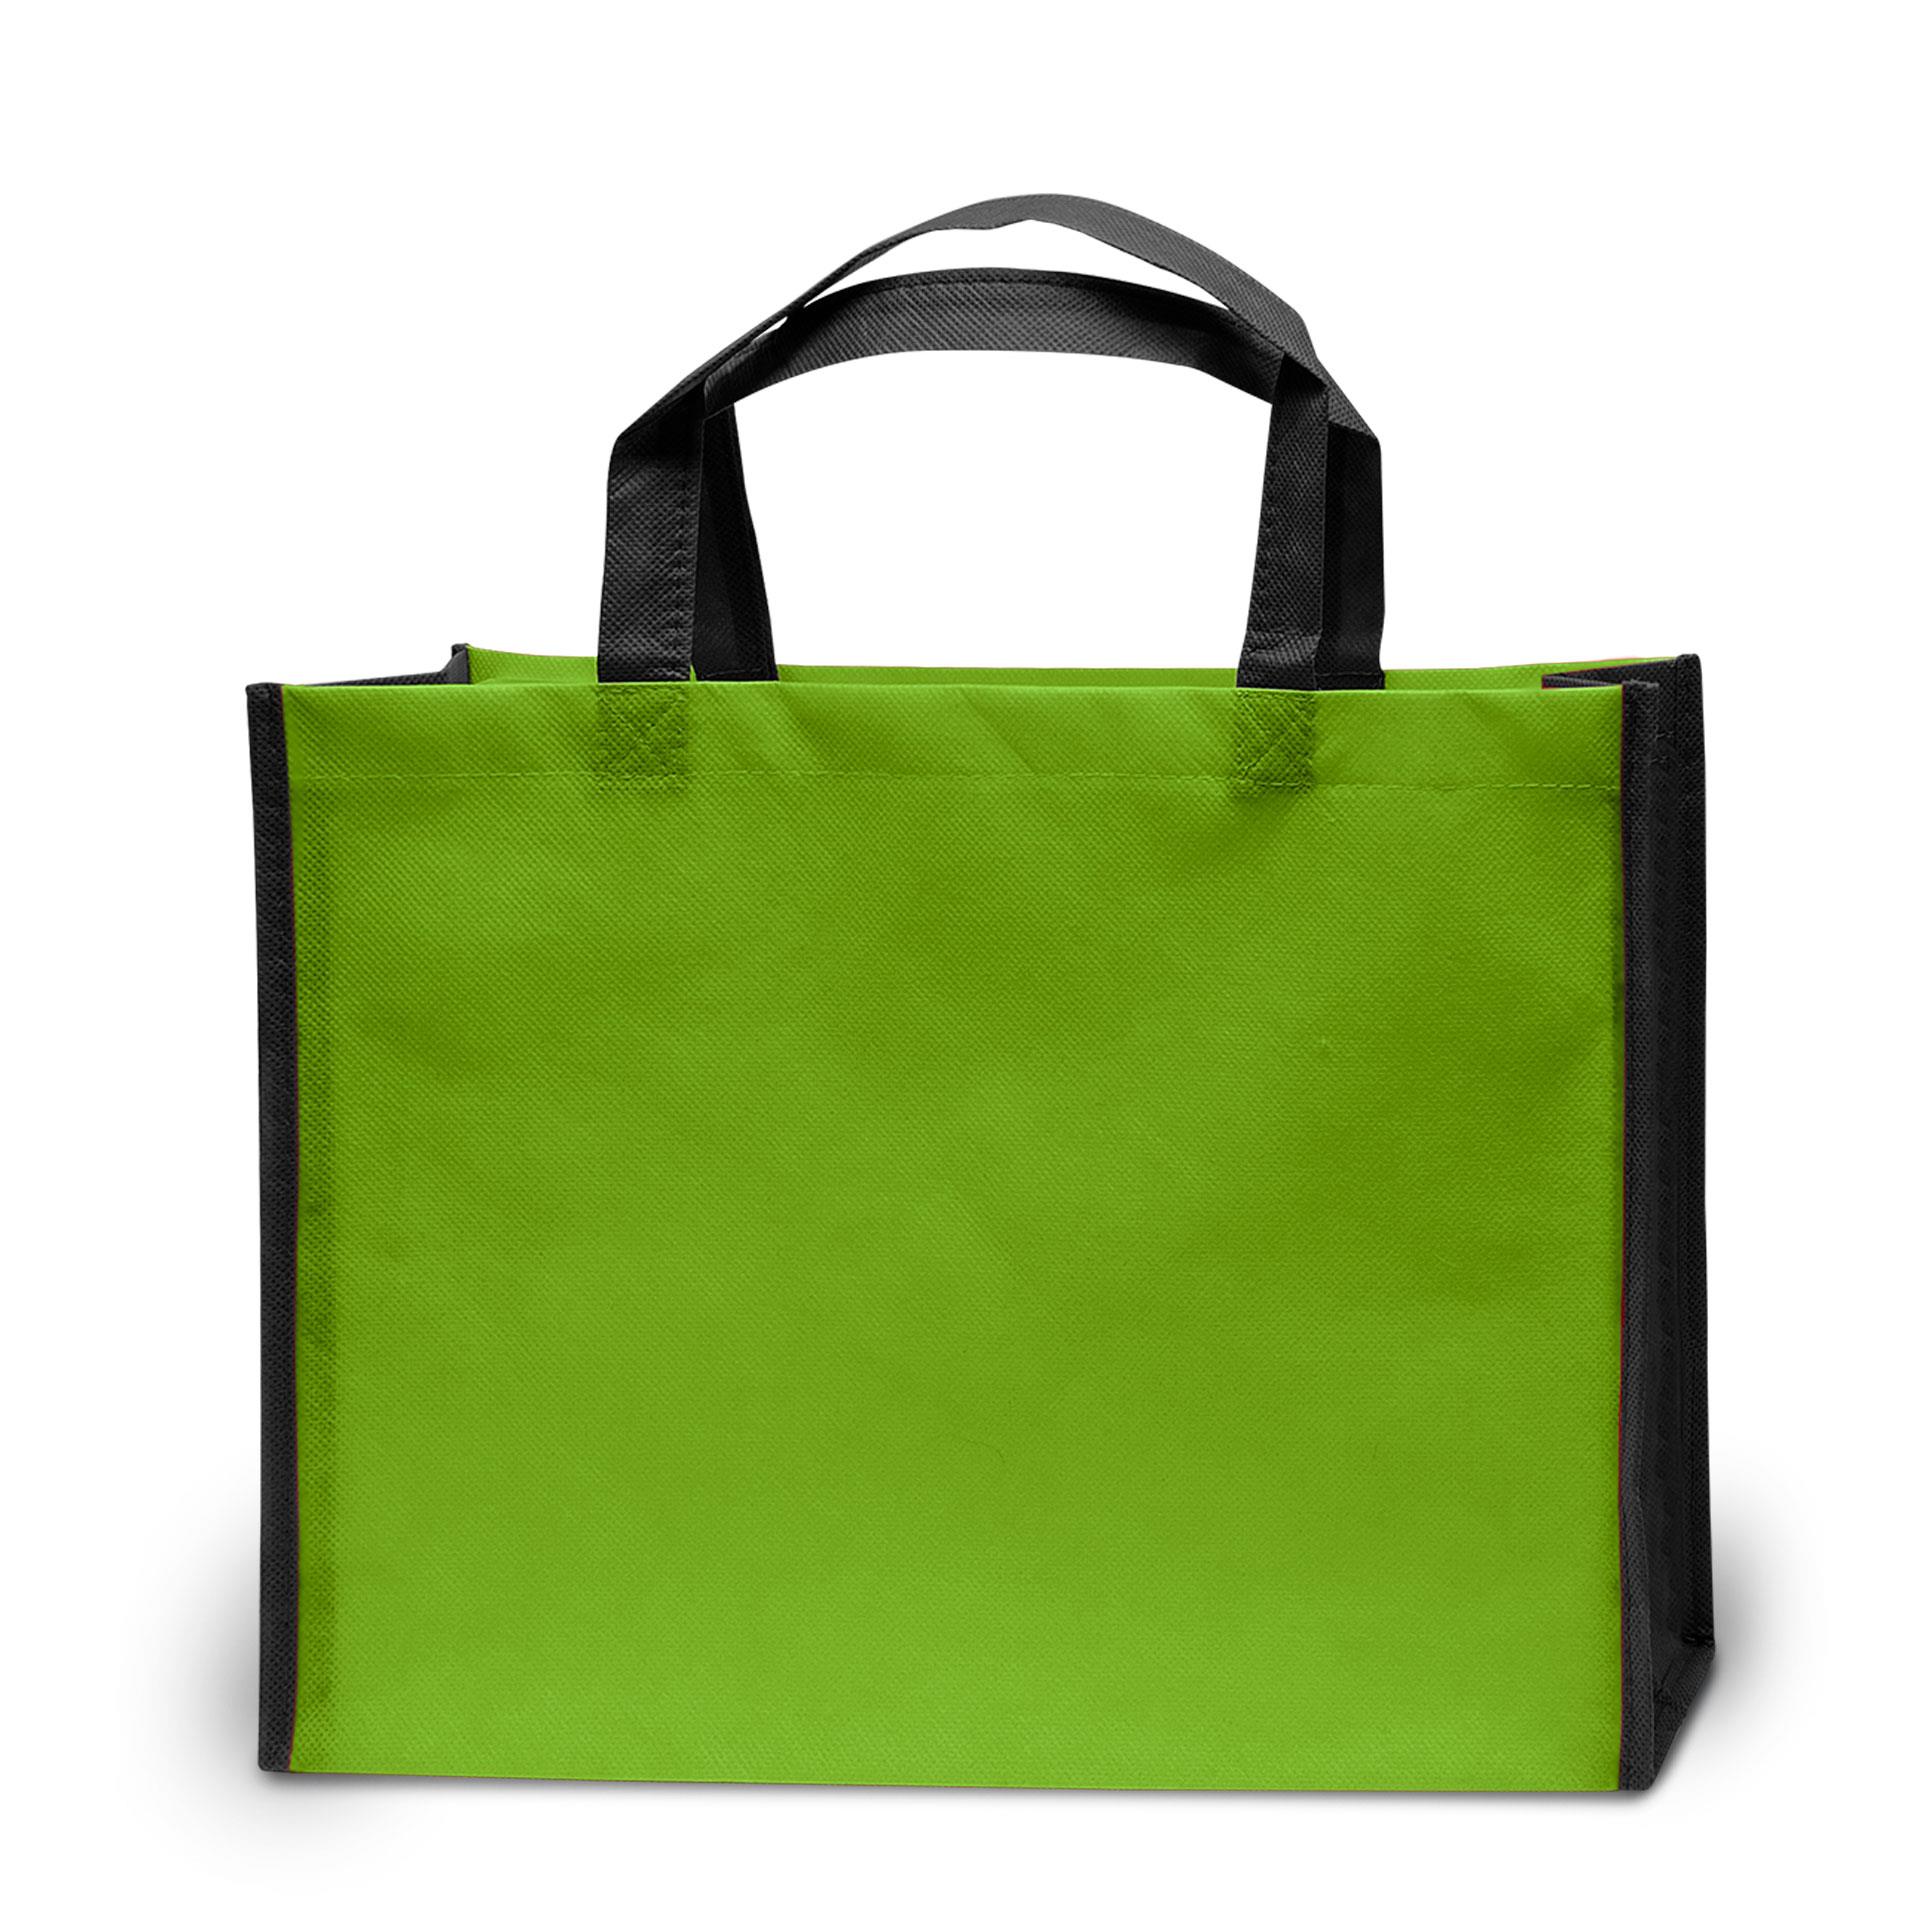 BERGEN - Tote bag with bottom and side folds